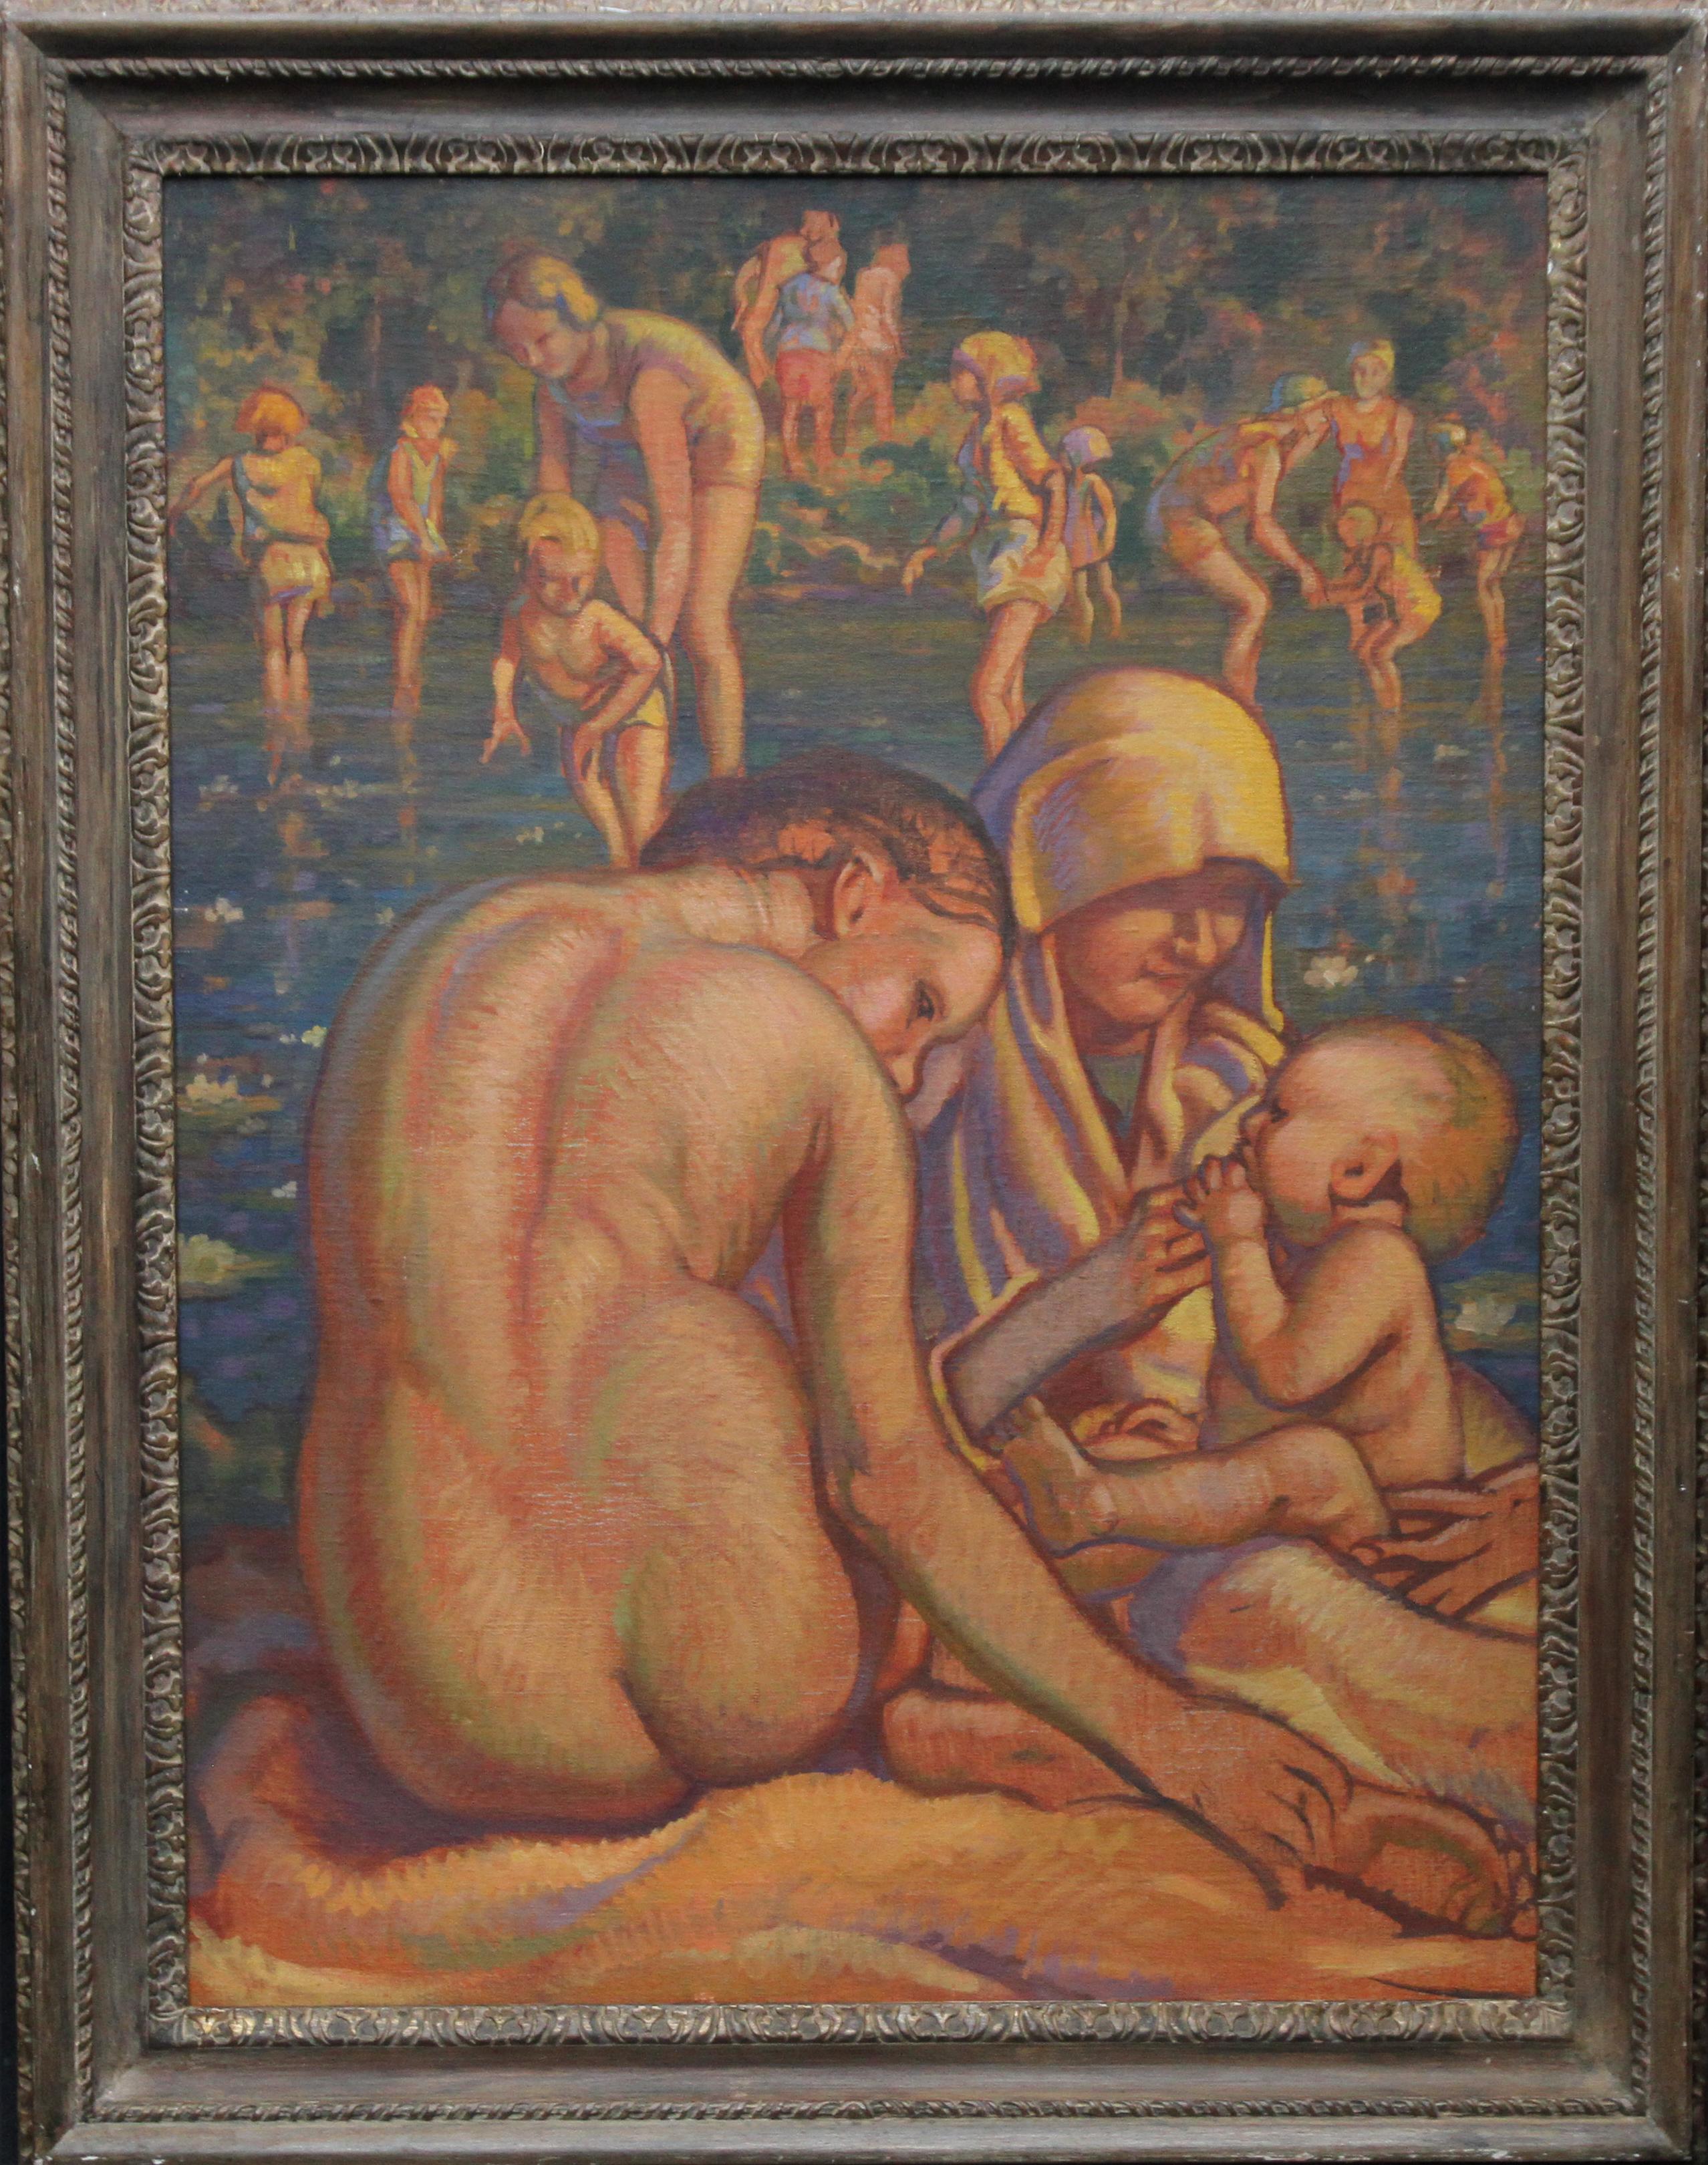 Mother and Child Bathing - British Slade School 30's Art Deco nude oil painting For Sale 3